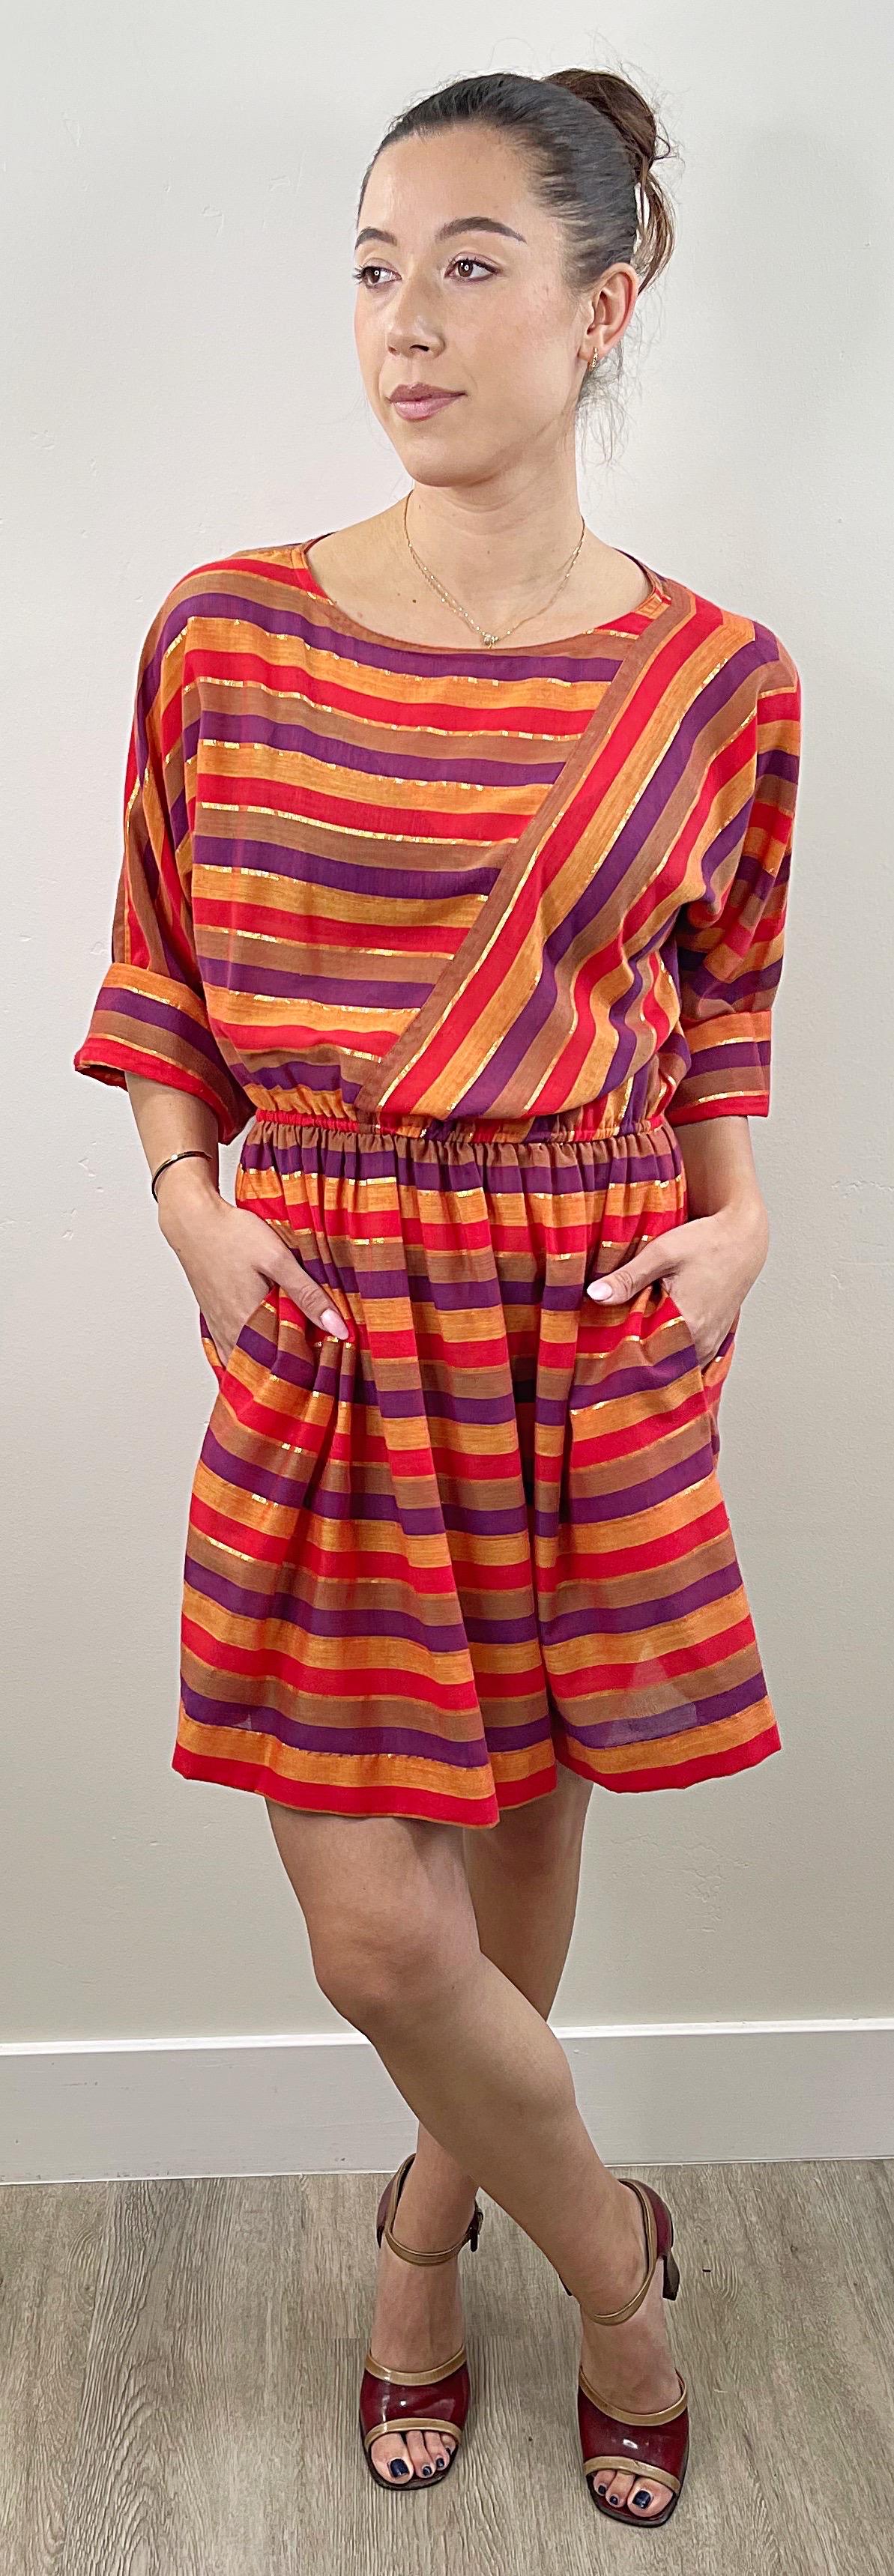 Late 1970s DIANE VON FURSTENBERG 3/4 sleeves autumnal dress ! Features wam tones of red, orange, purple, and gold metallic. Elastic waistband and dolman sleeves can accommodate an array of sizes. POCKETS at each side of the hips. Soft cotton blend